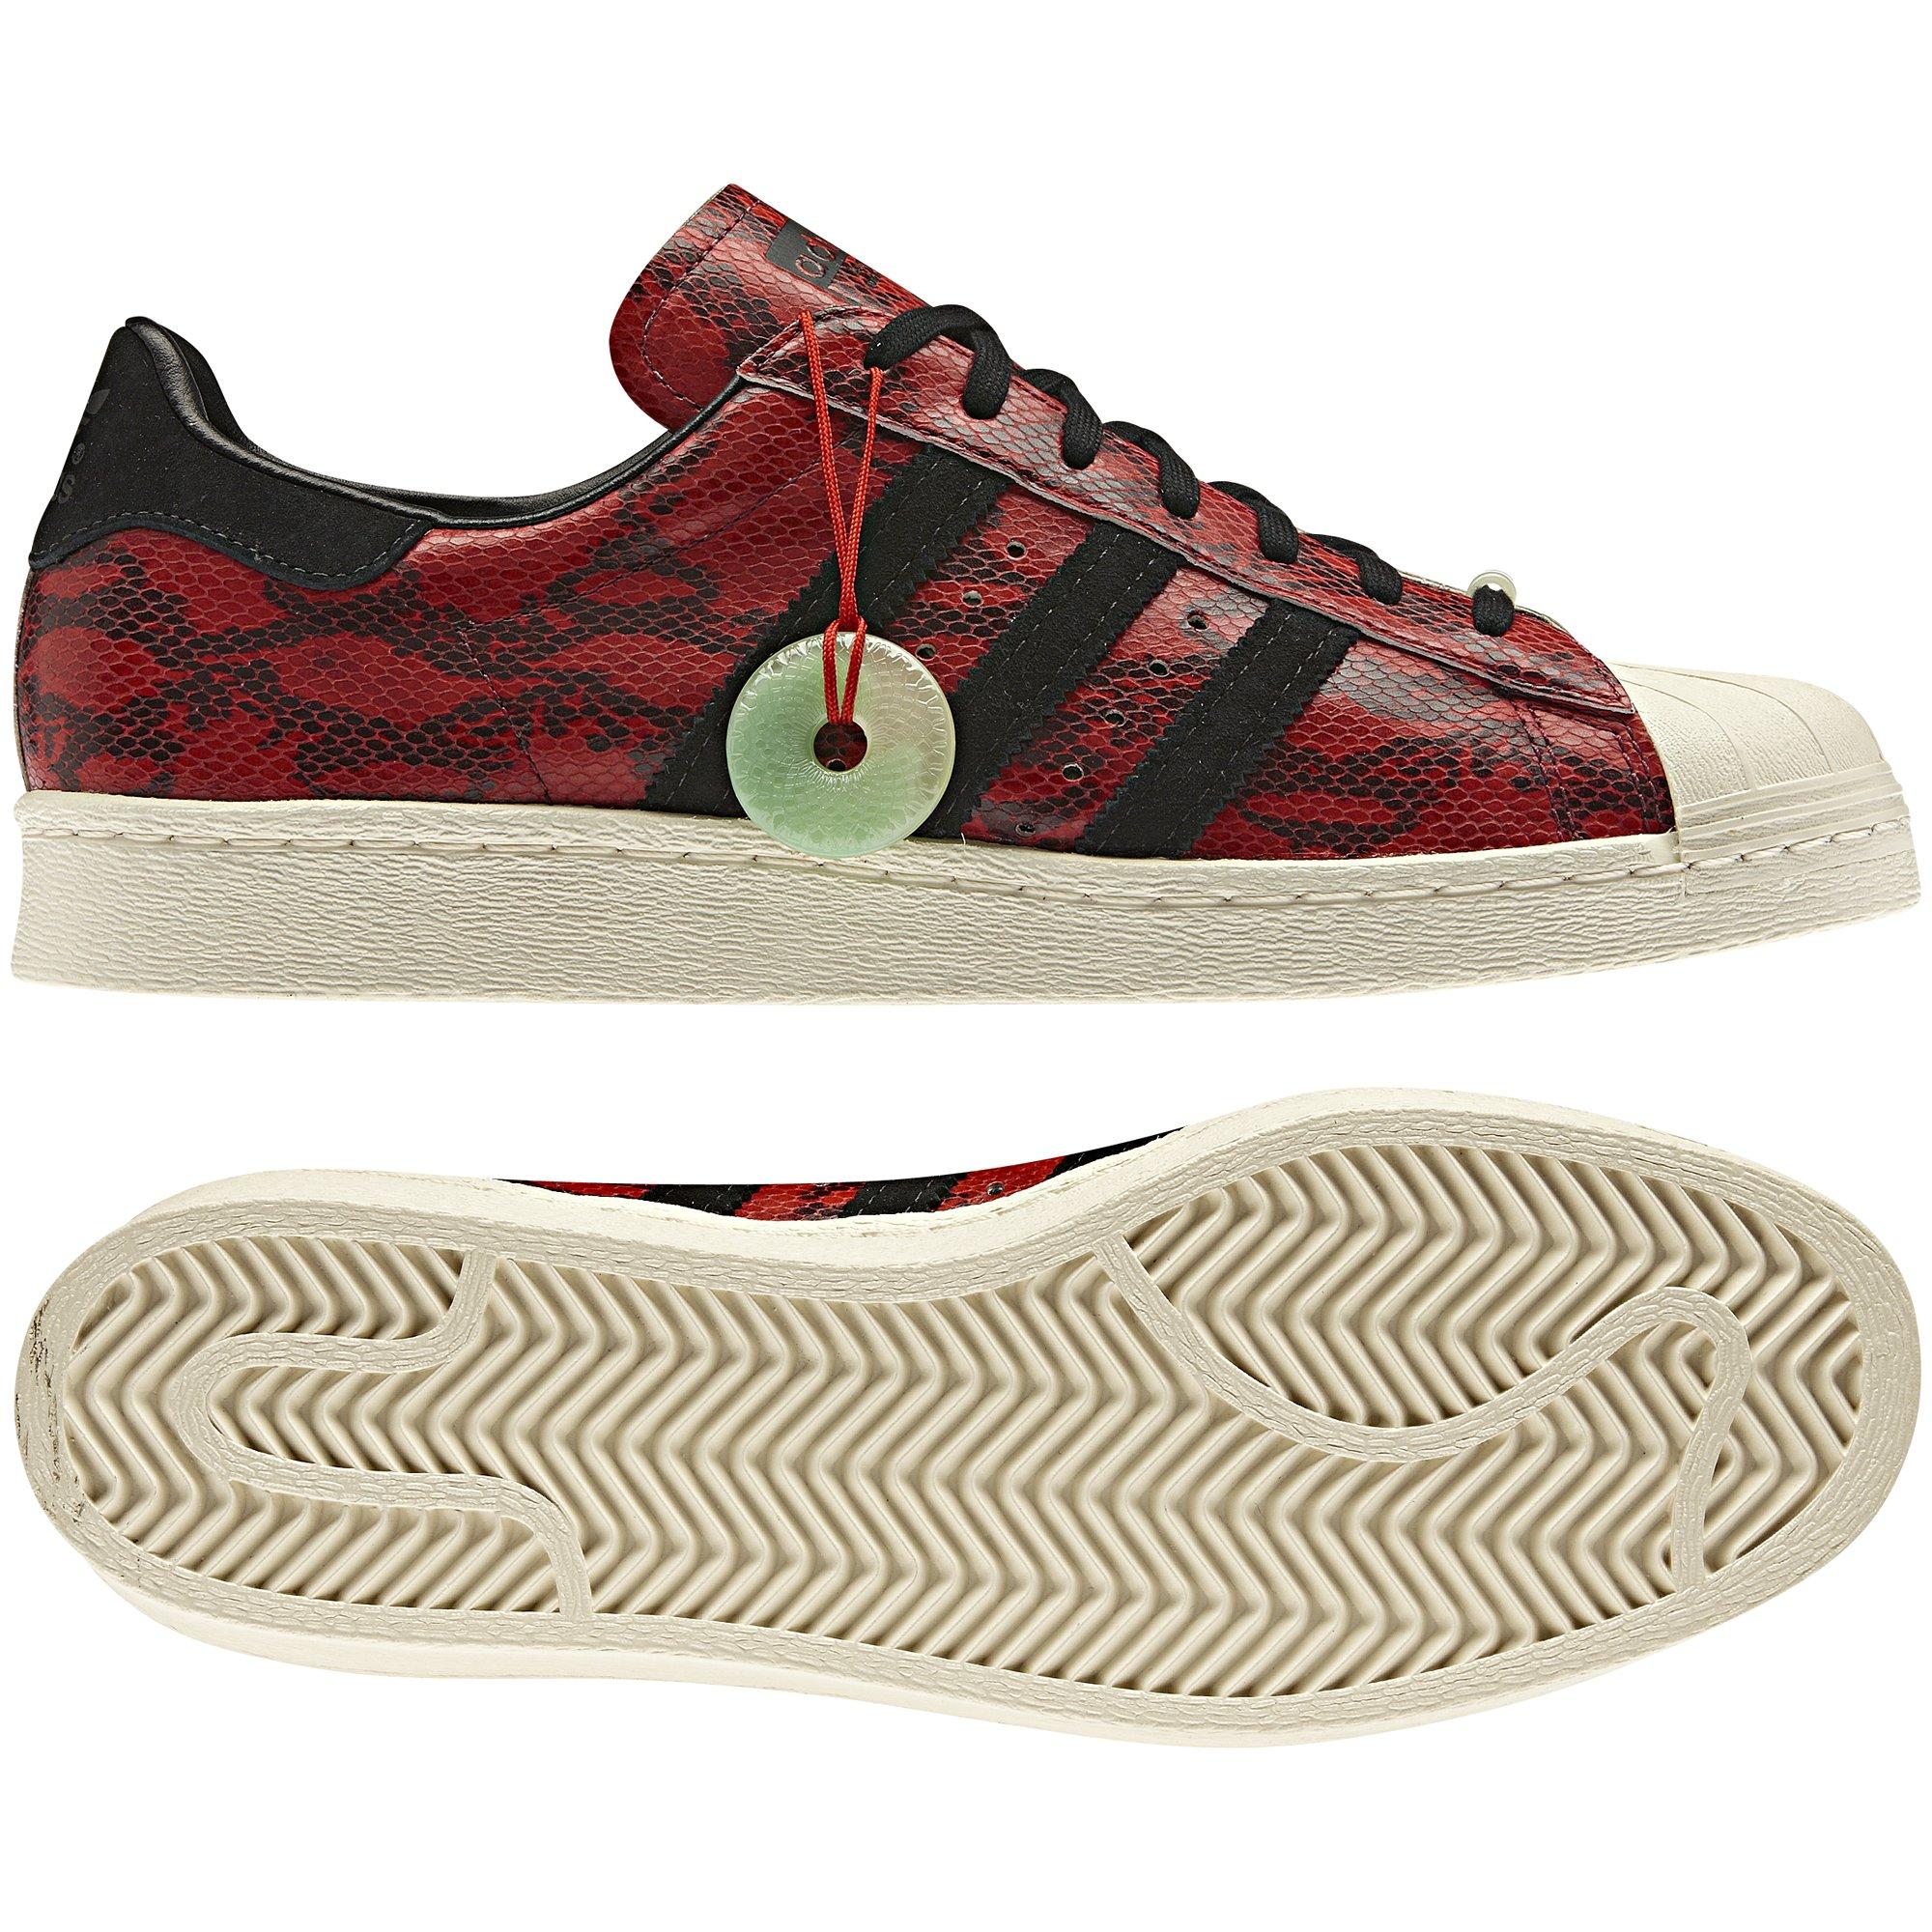 Foto adidas zapatilla Superstar 80s Chinese New Year Hombre